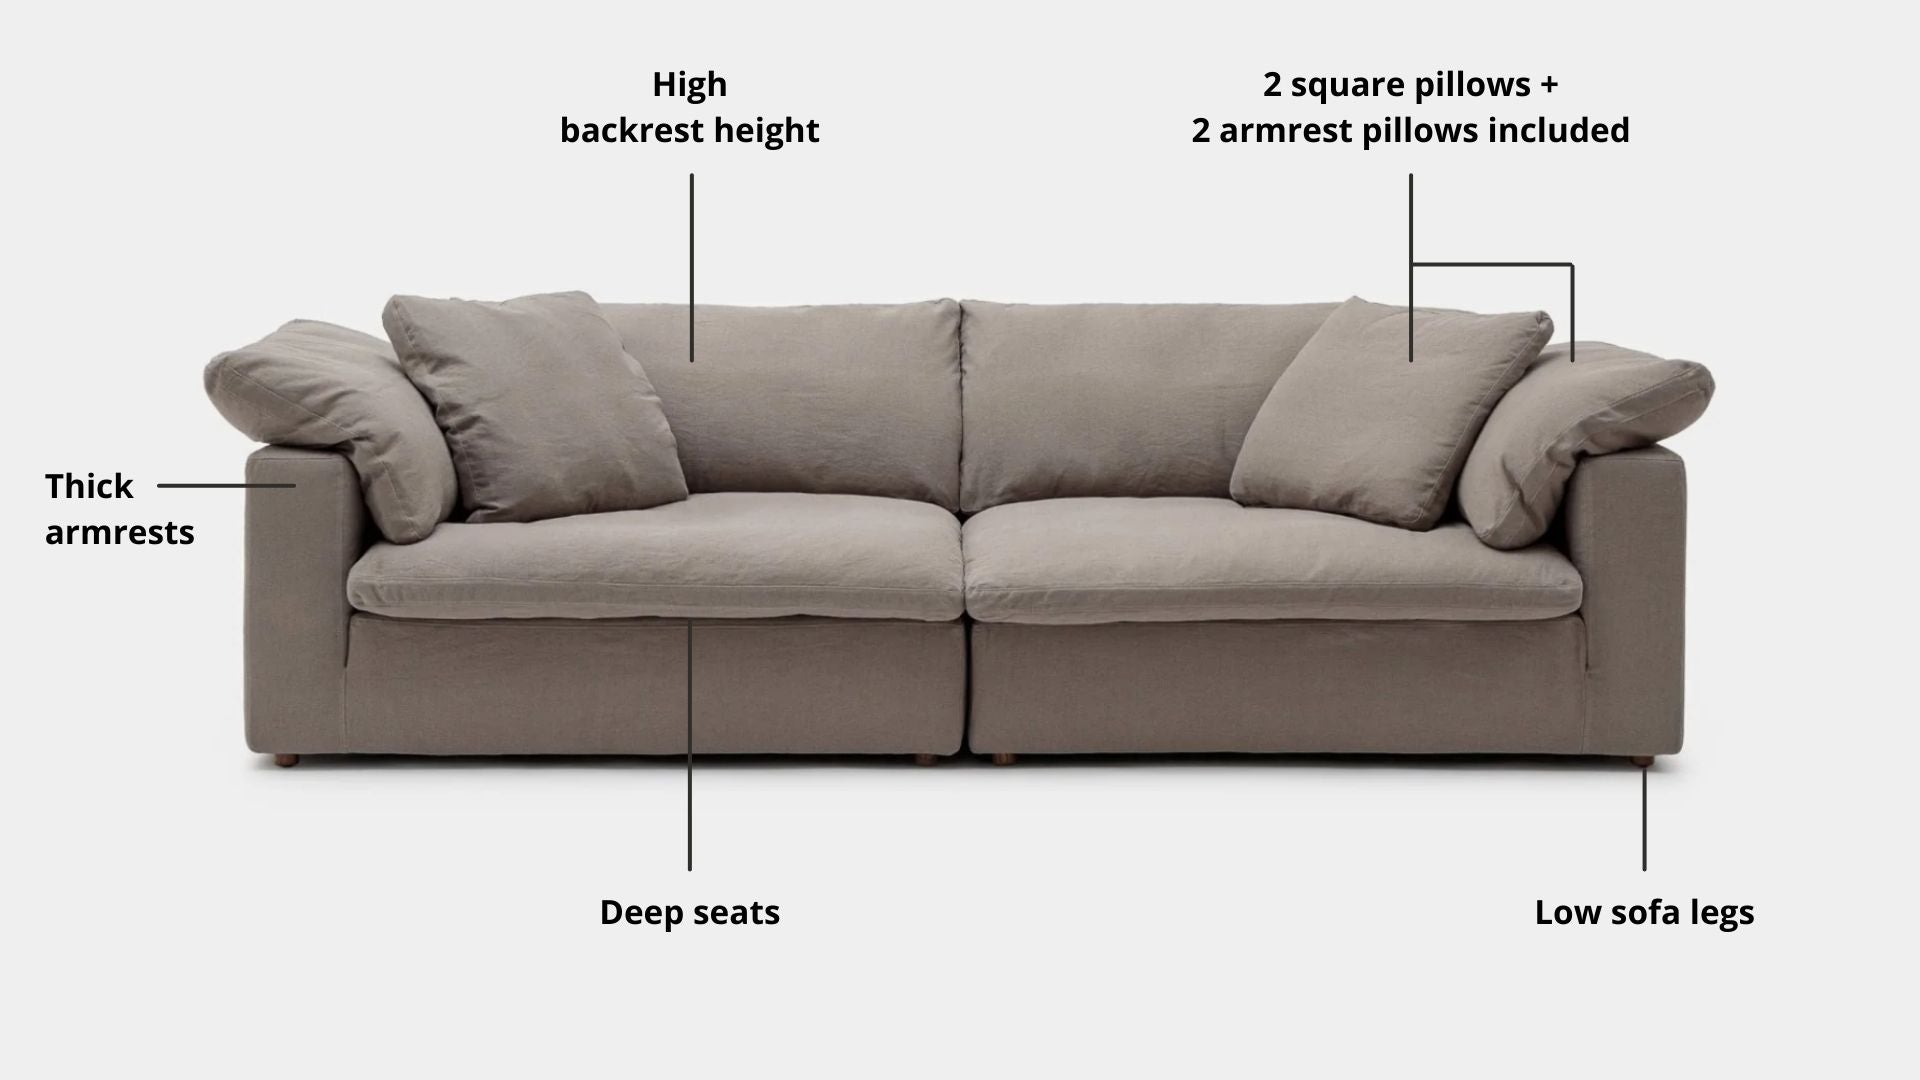 Key features such as armrest thickness, cushion height, seat depth and sofa leg height for Cloud Fabric Sofa